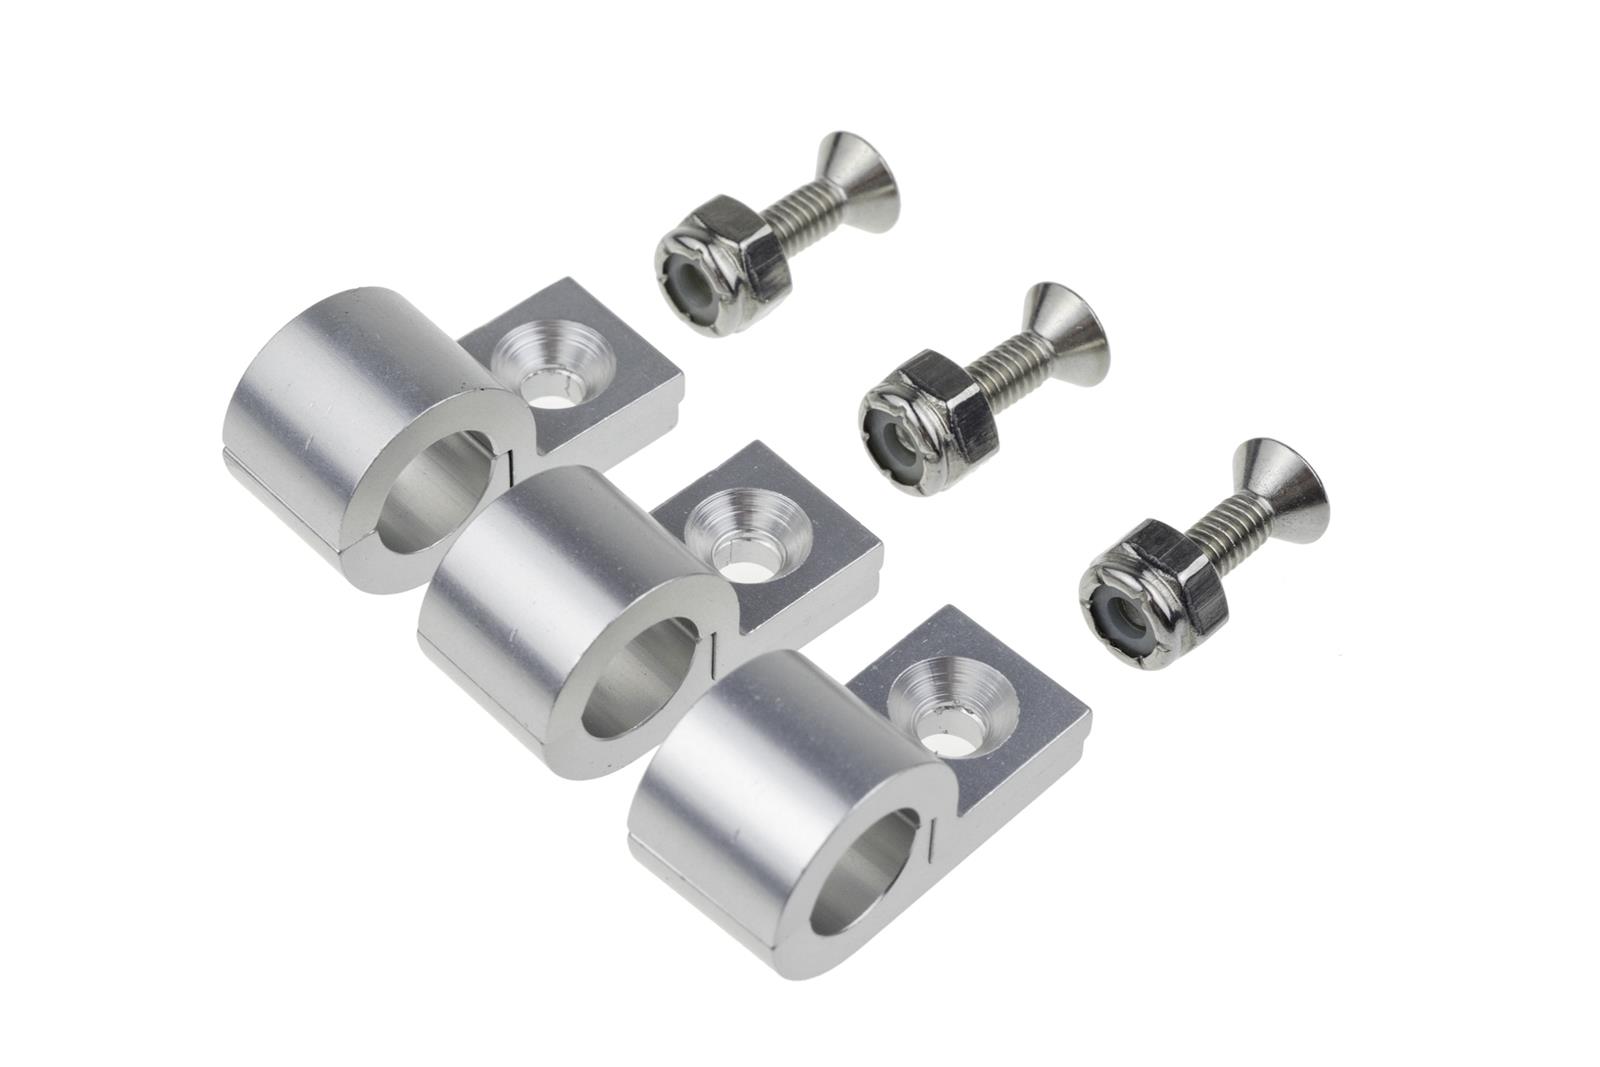 Redhorse Performance 320-916-5 9/16in Polished Aluminum Line Clamps-clear - 6pcs/pkg